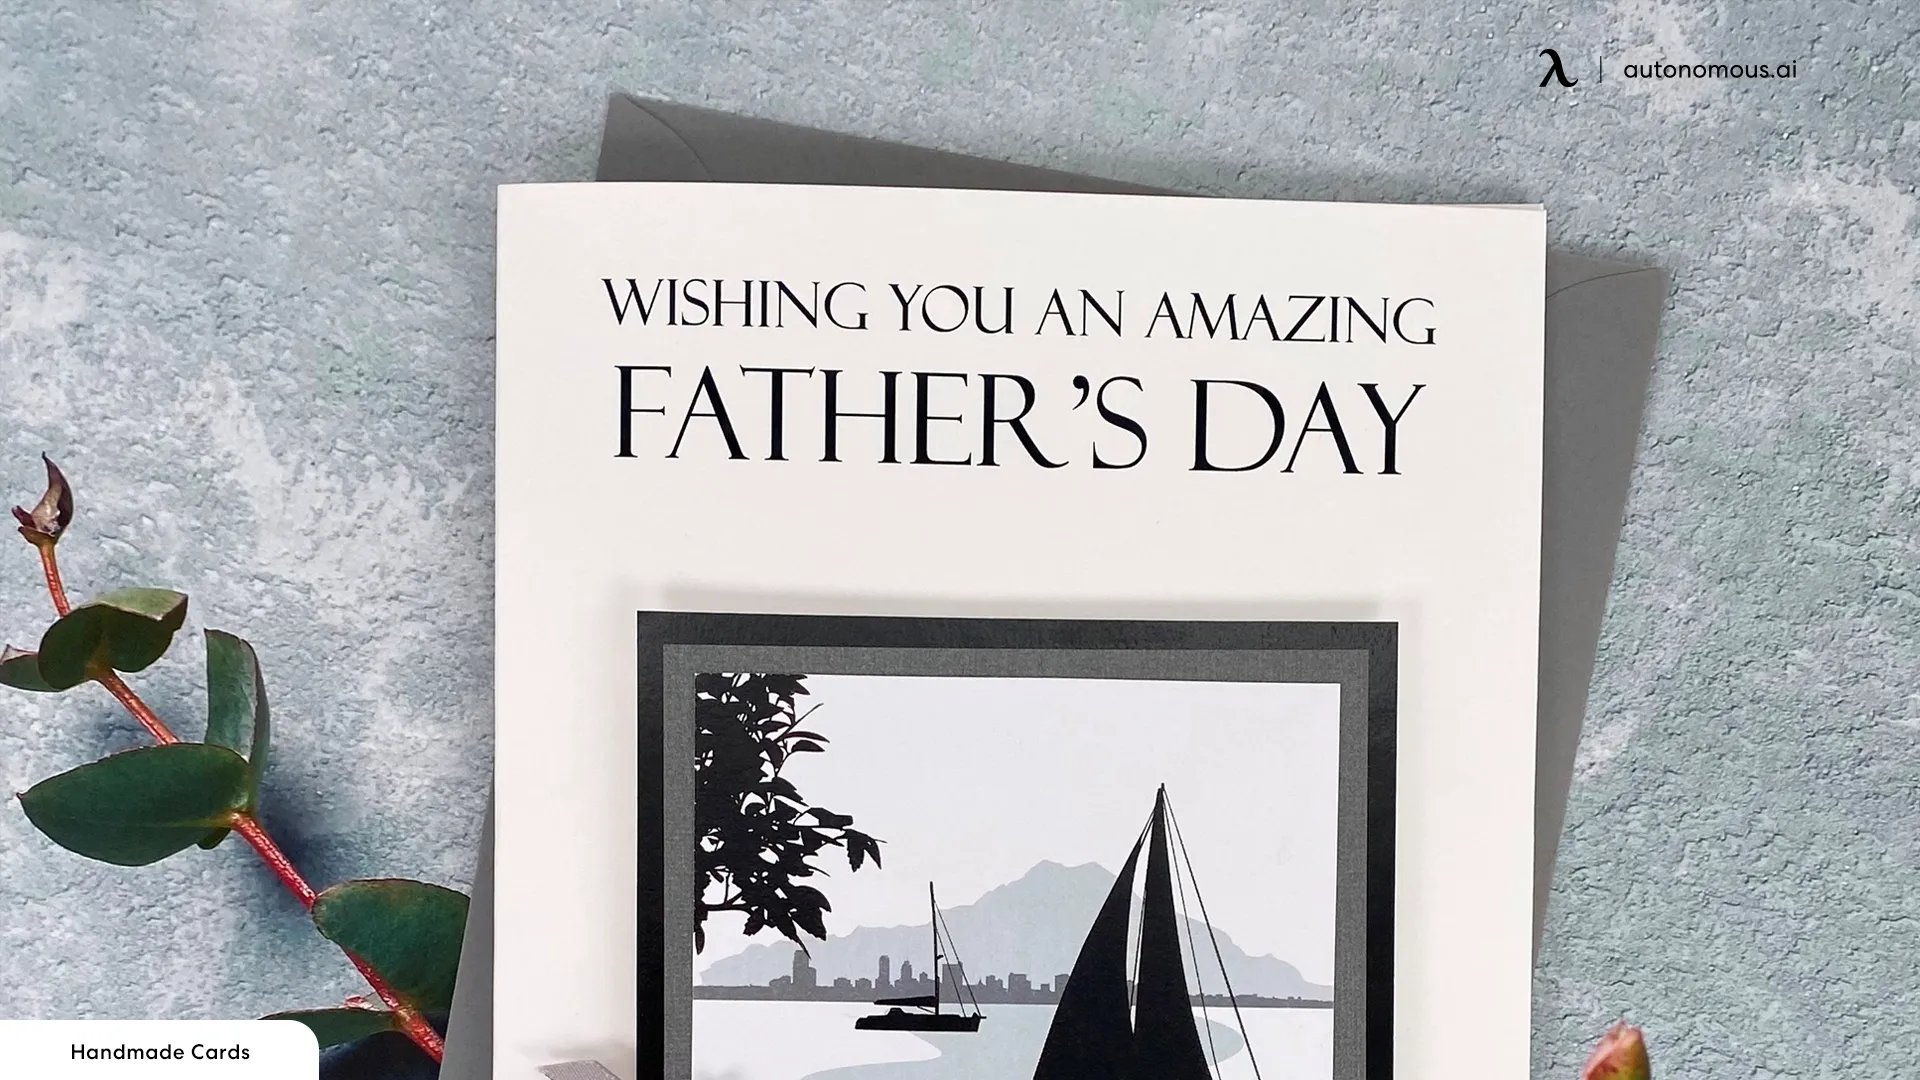 Homemade Father's Day Cards - Father's Day decoration